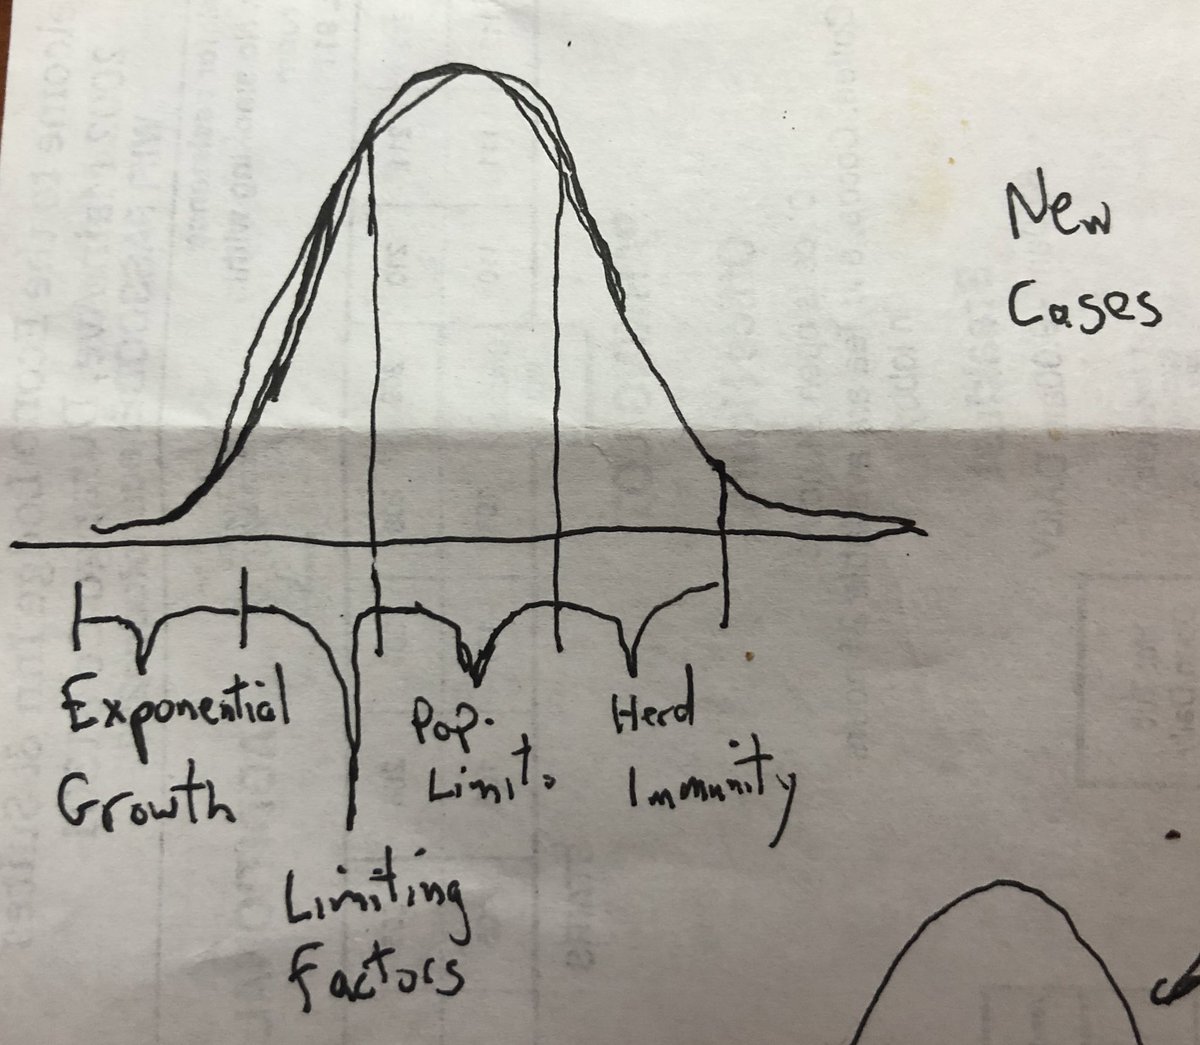 This is where the bell curve comes in. Bell curve is number of new cases, which is the change in total cases over the previous time period. Let’s examine it.